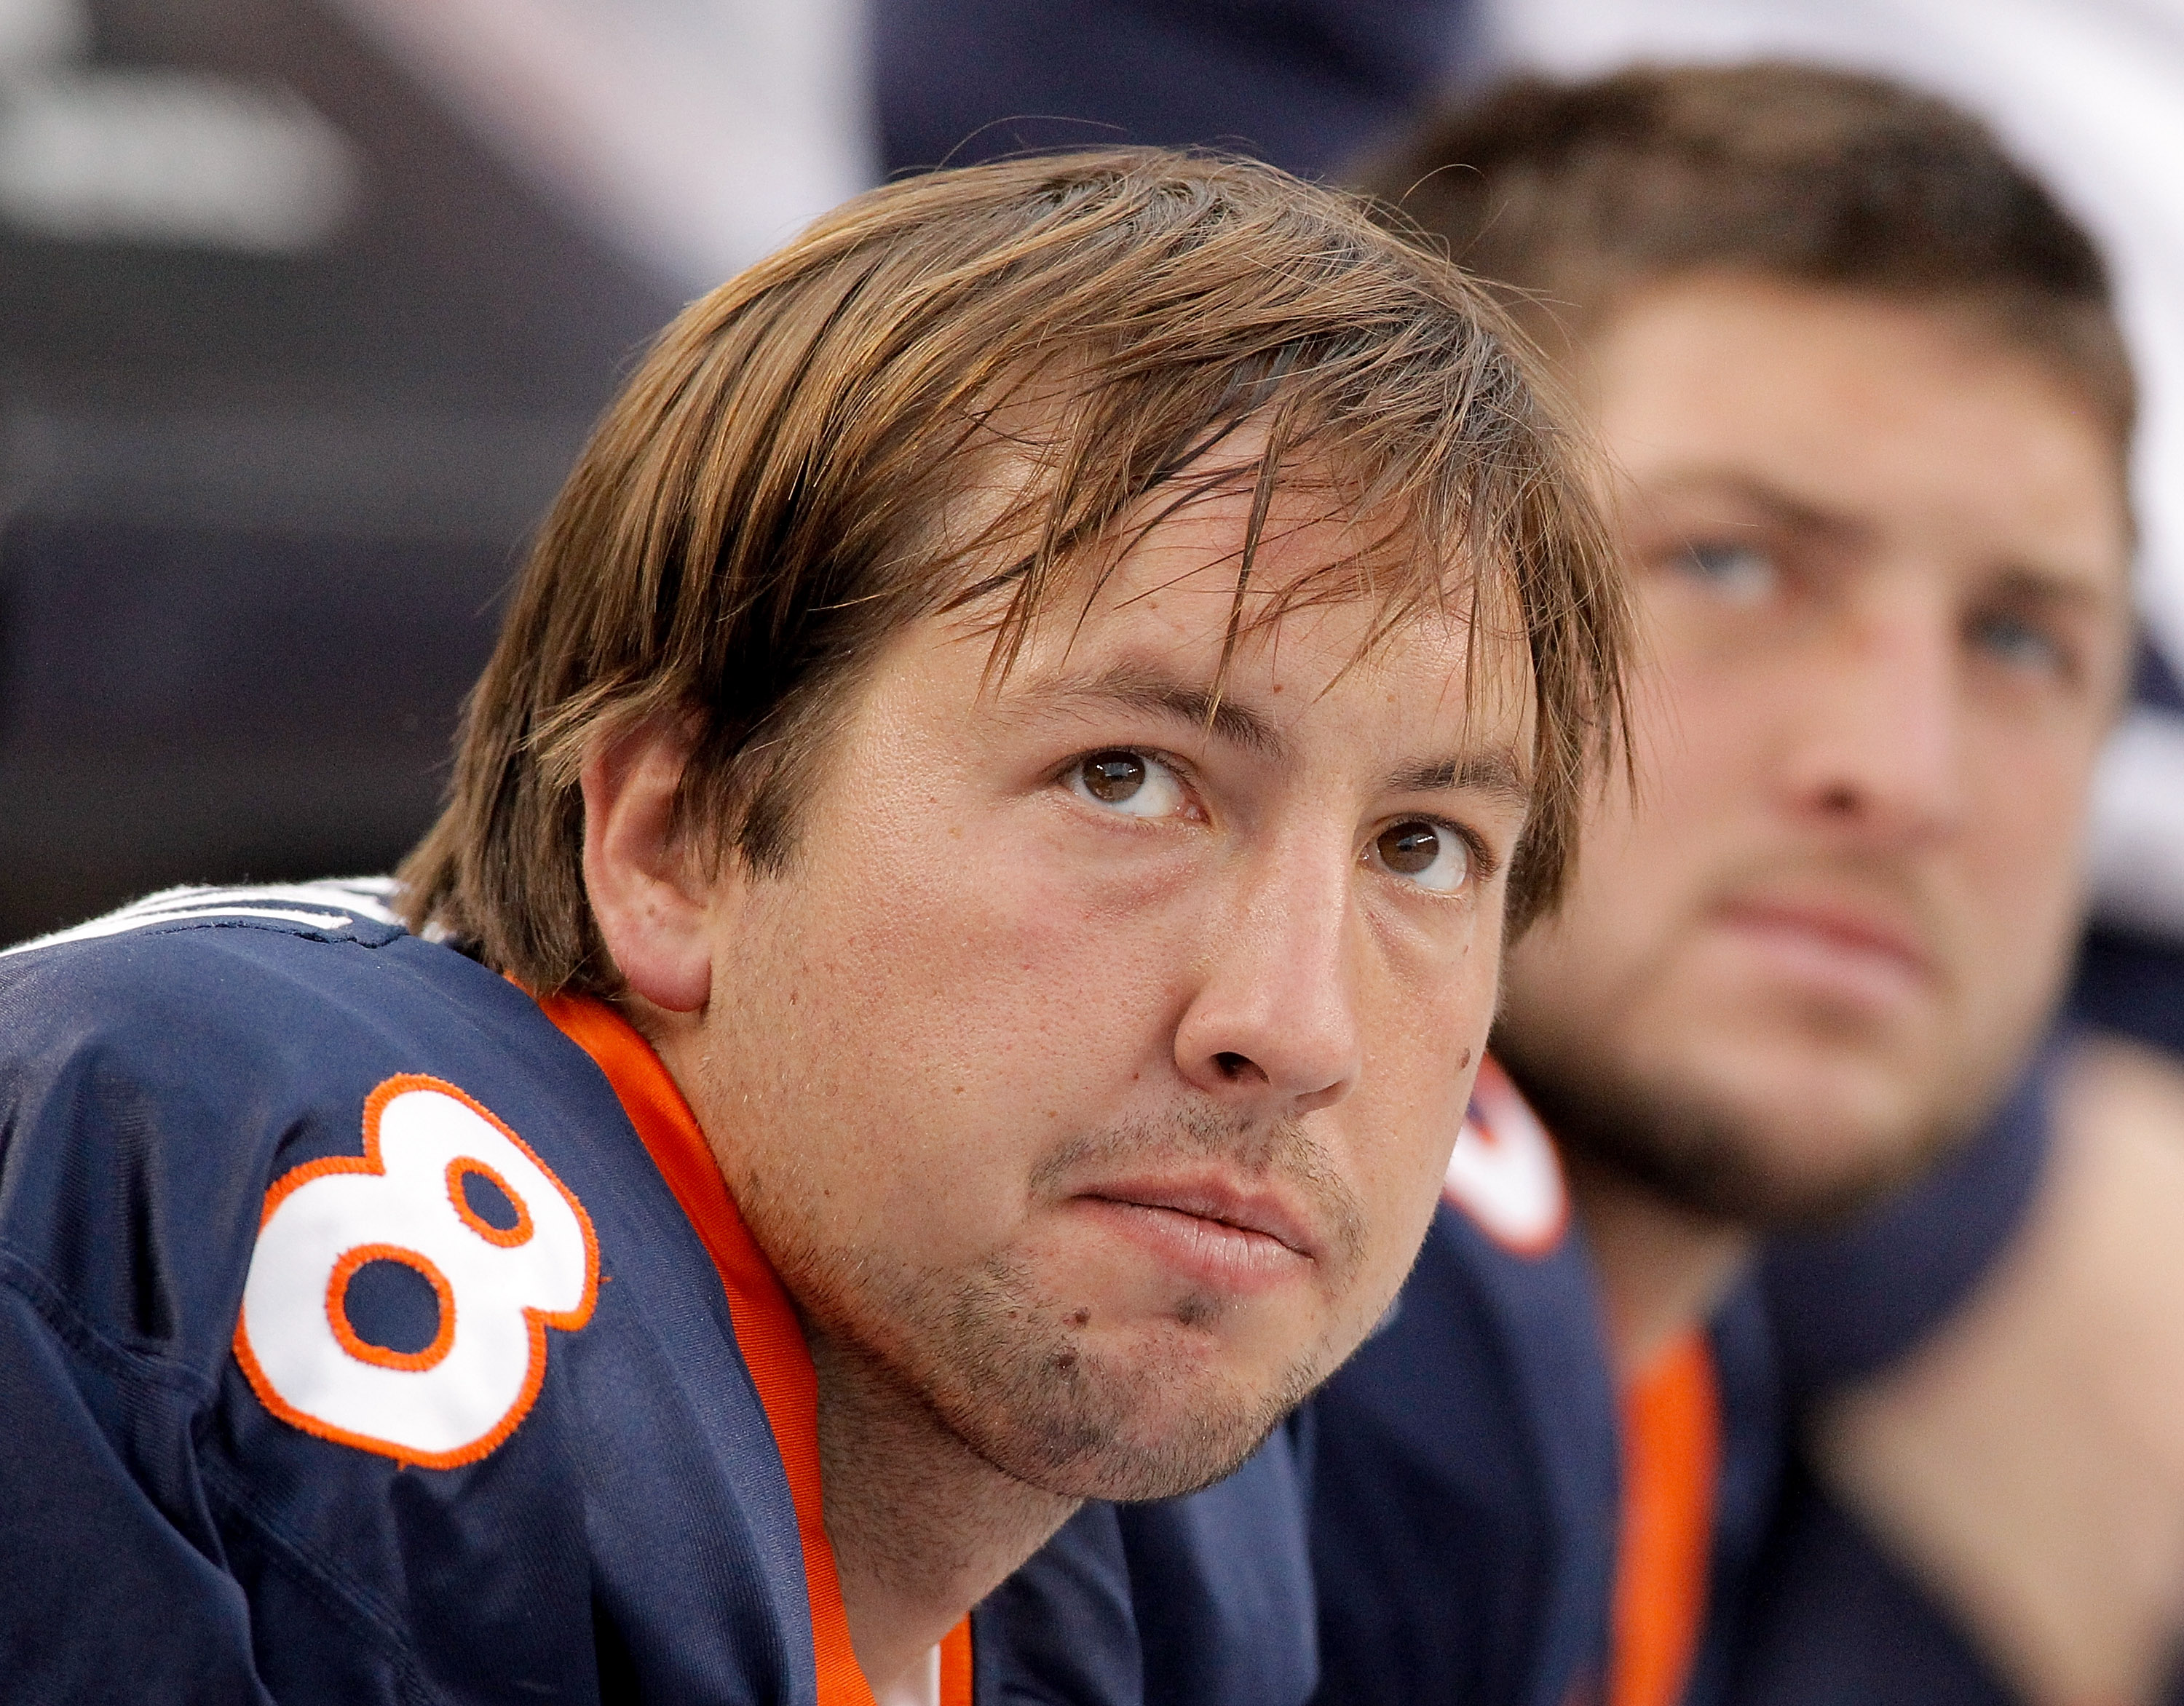 DENVER - OCTOBER 24:  Quarterbacks Kyle Orton #8 and Tim Tebow #15 of the Denver Broncos look on from the bench during their 59-14 loss to the Oakland Raiders at INVESCO Field at Mile High on October 24, 2010 in Denver, Colorado. (Photo by Justin Edmonds/